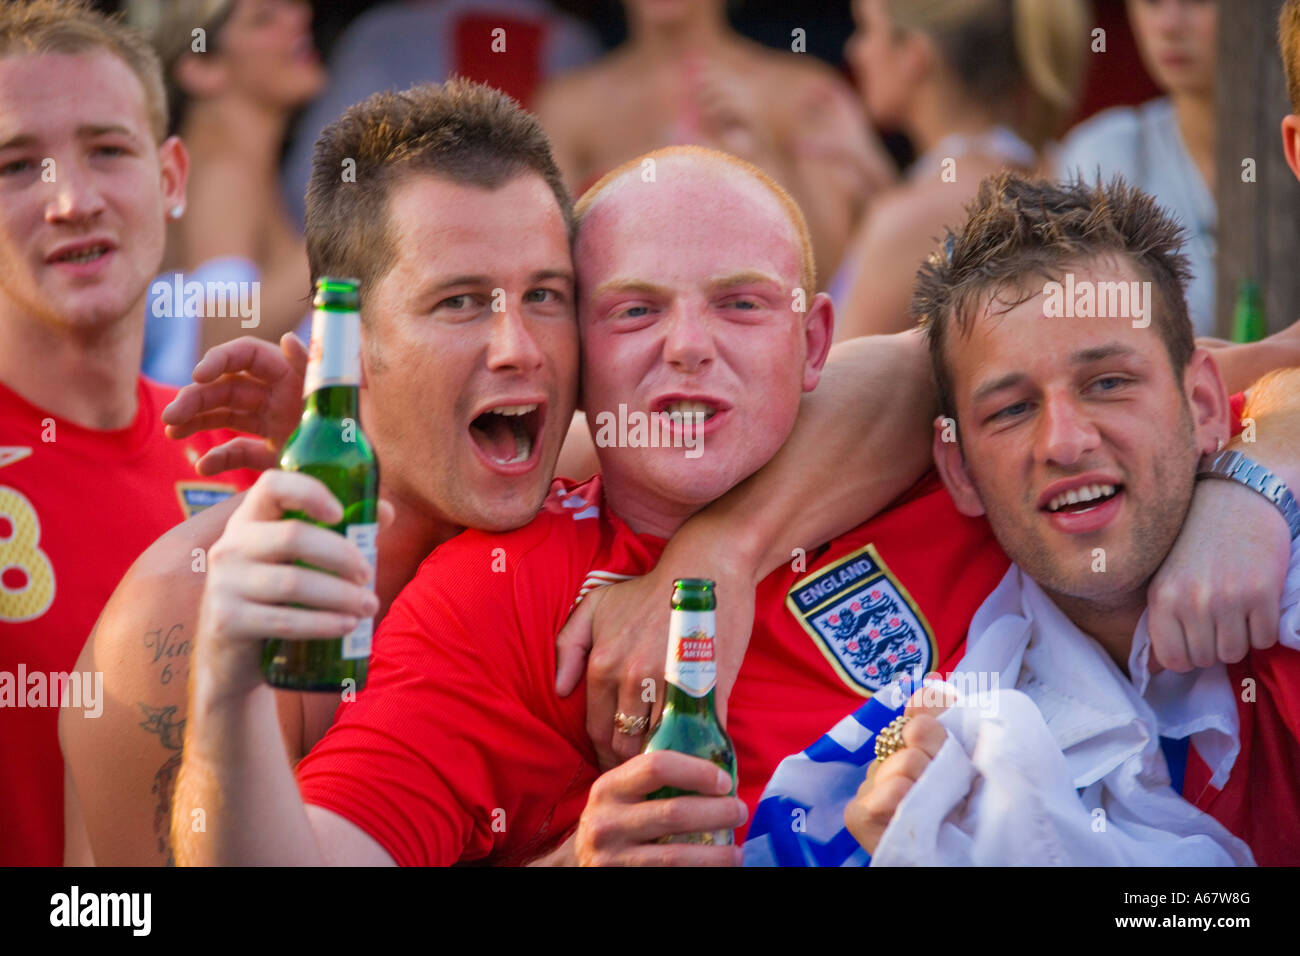 three-young-men-english-football-fans-in-kavos-corfu-after-england-A67W8G.jpg